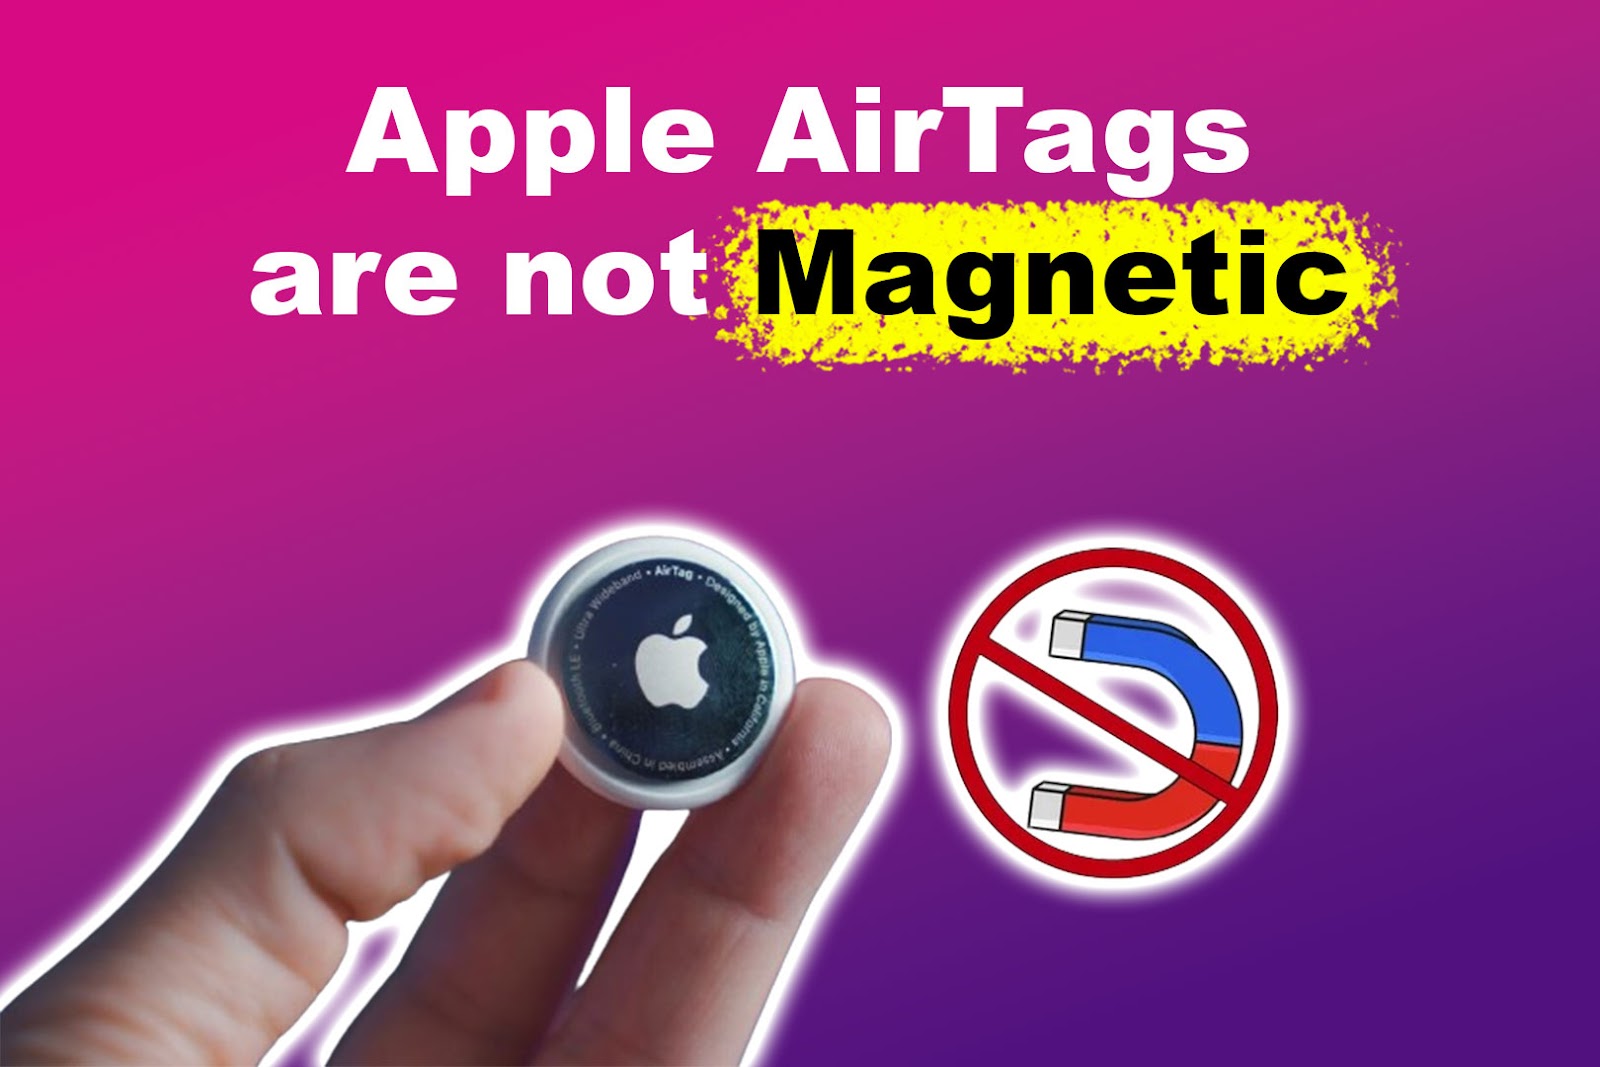 Are AirTags Magnetic